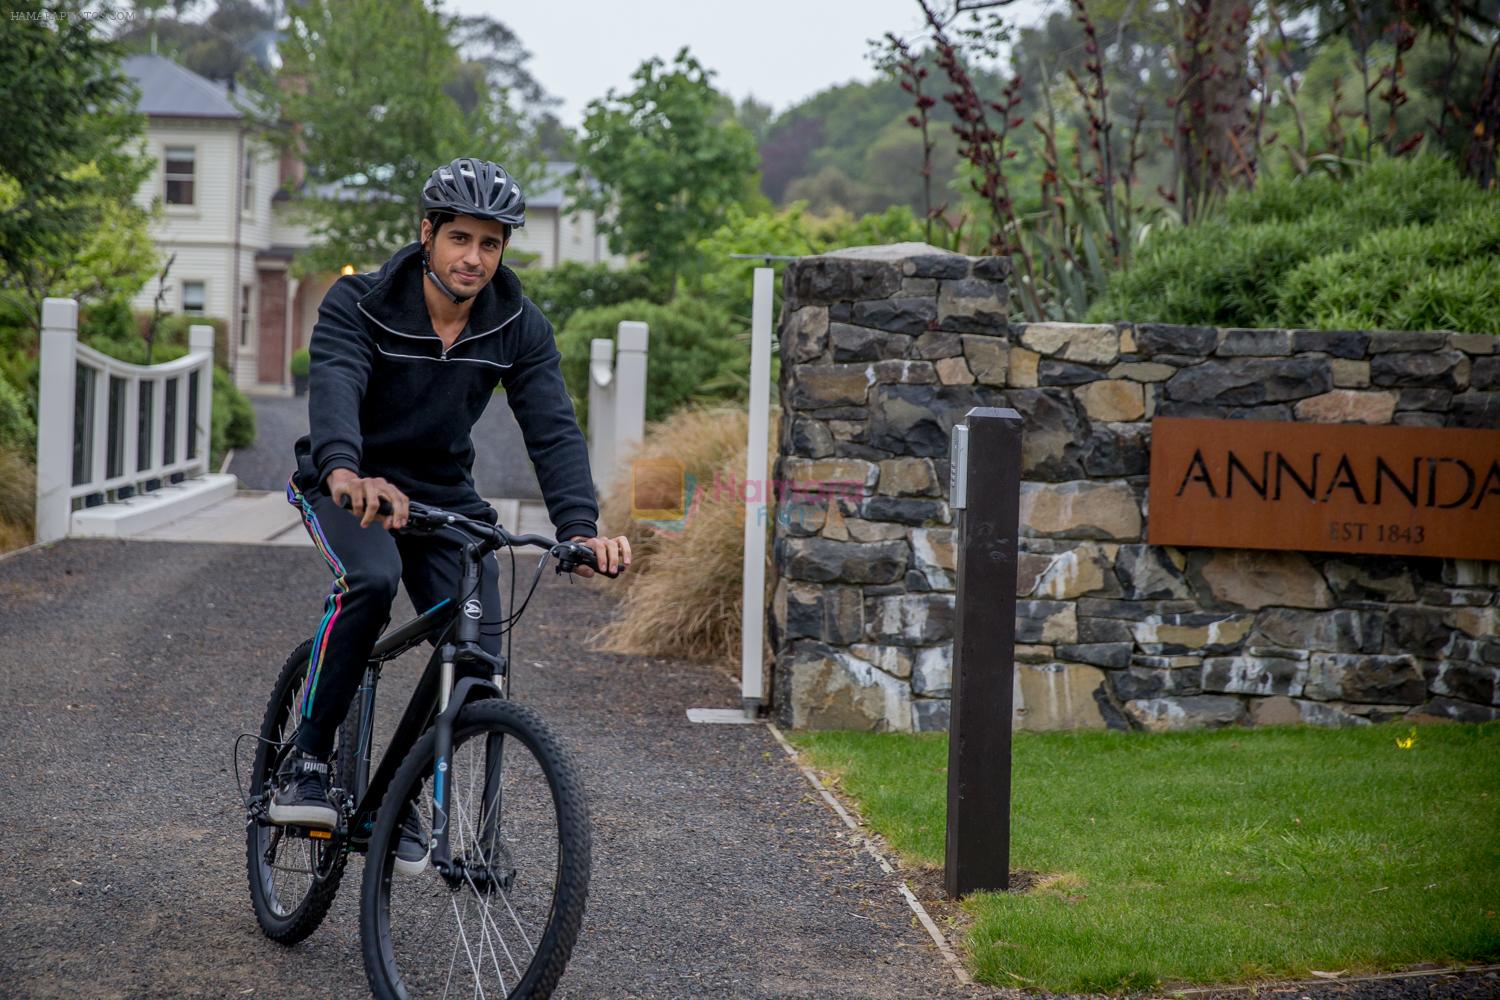 Sidharth rides a bicycle in picturesque New Zealand